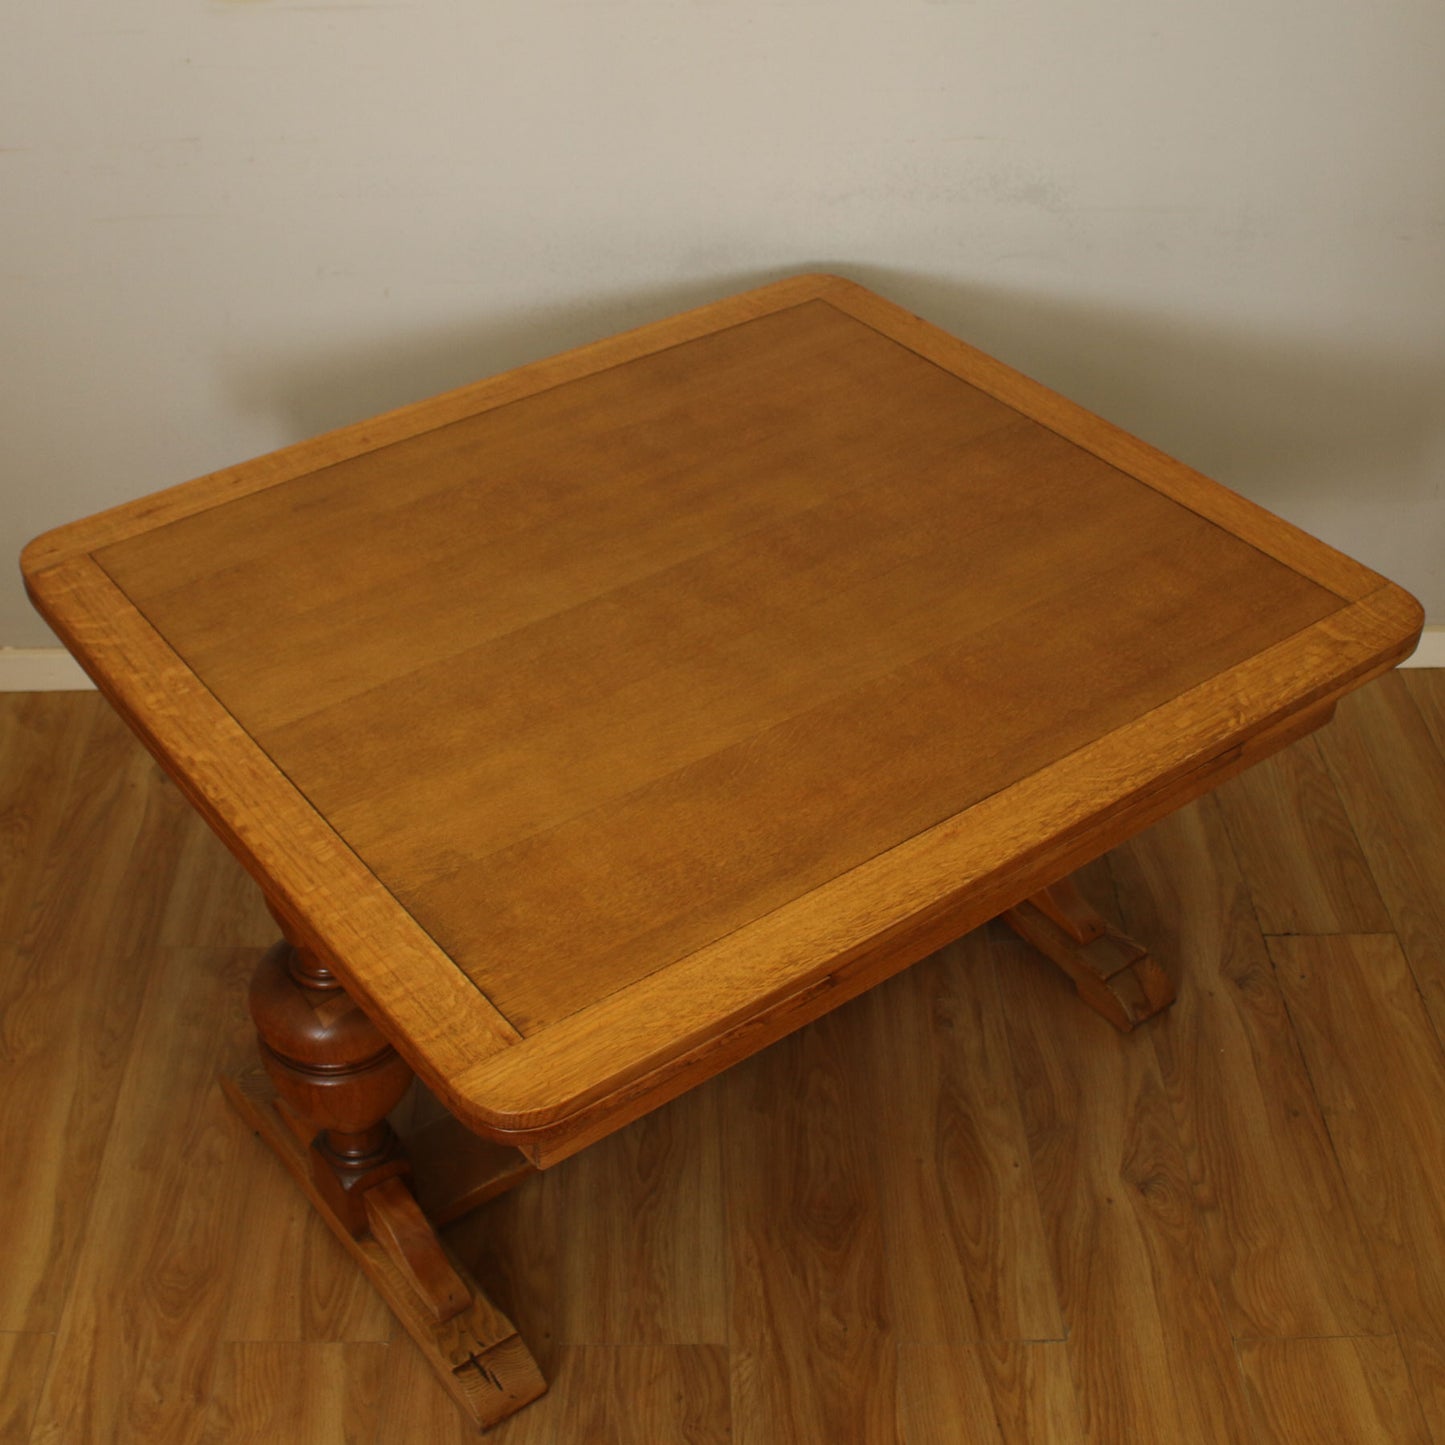 Restored Oak Table and Six Chairs